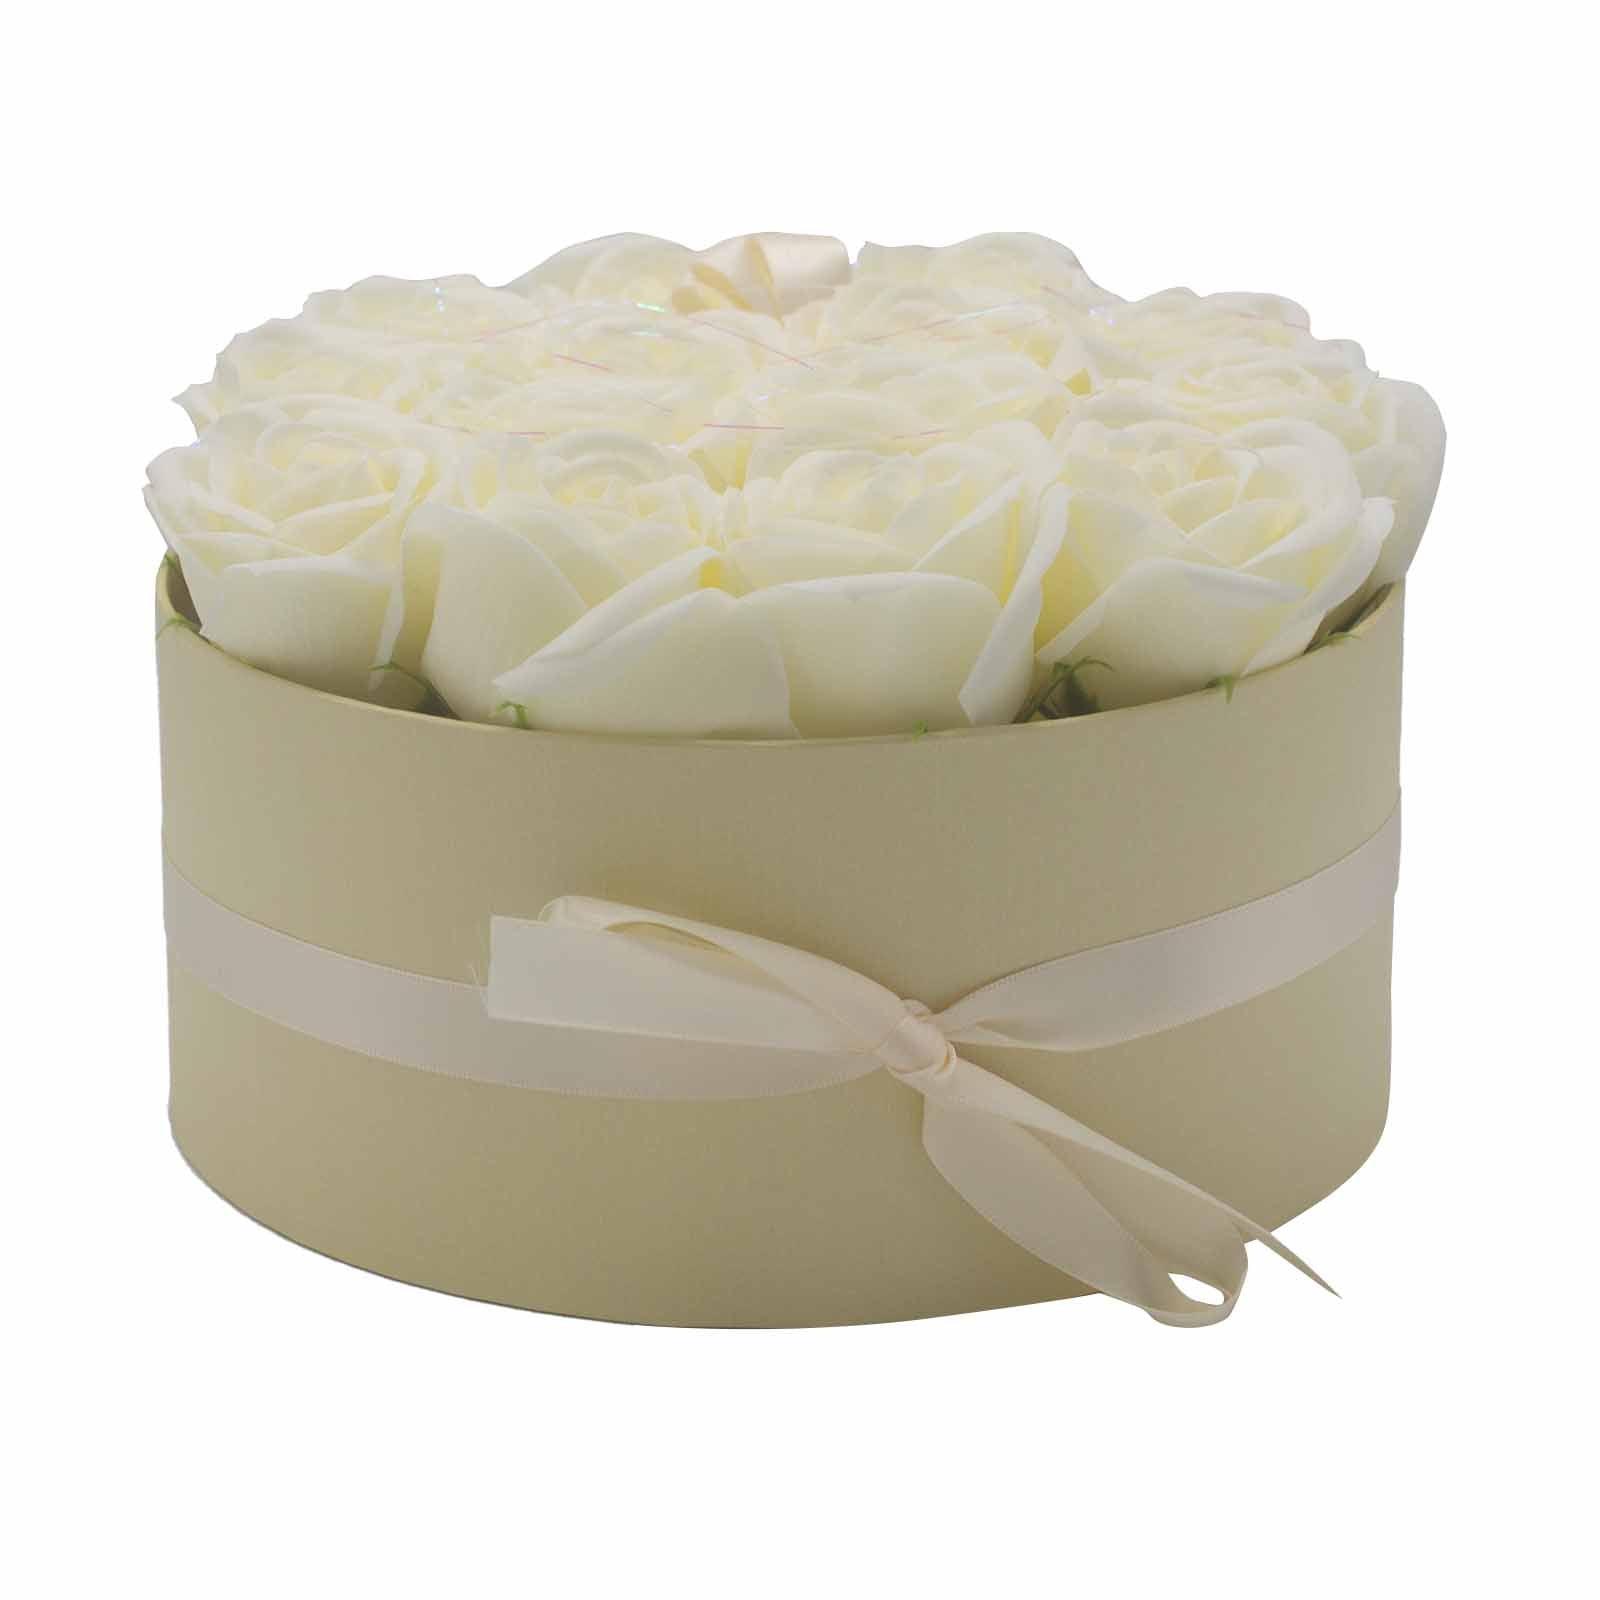 Soap Flower Gift Bouquet - 14 Cream Roses - Round - DuvetDay.co.uk